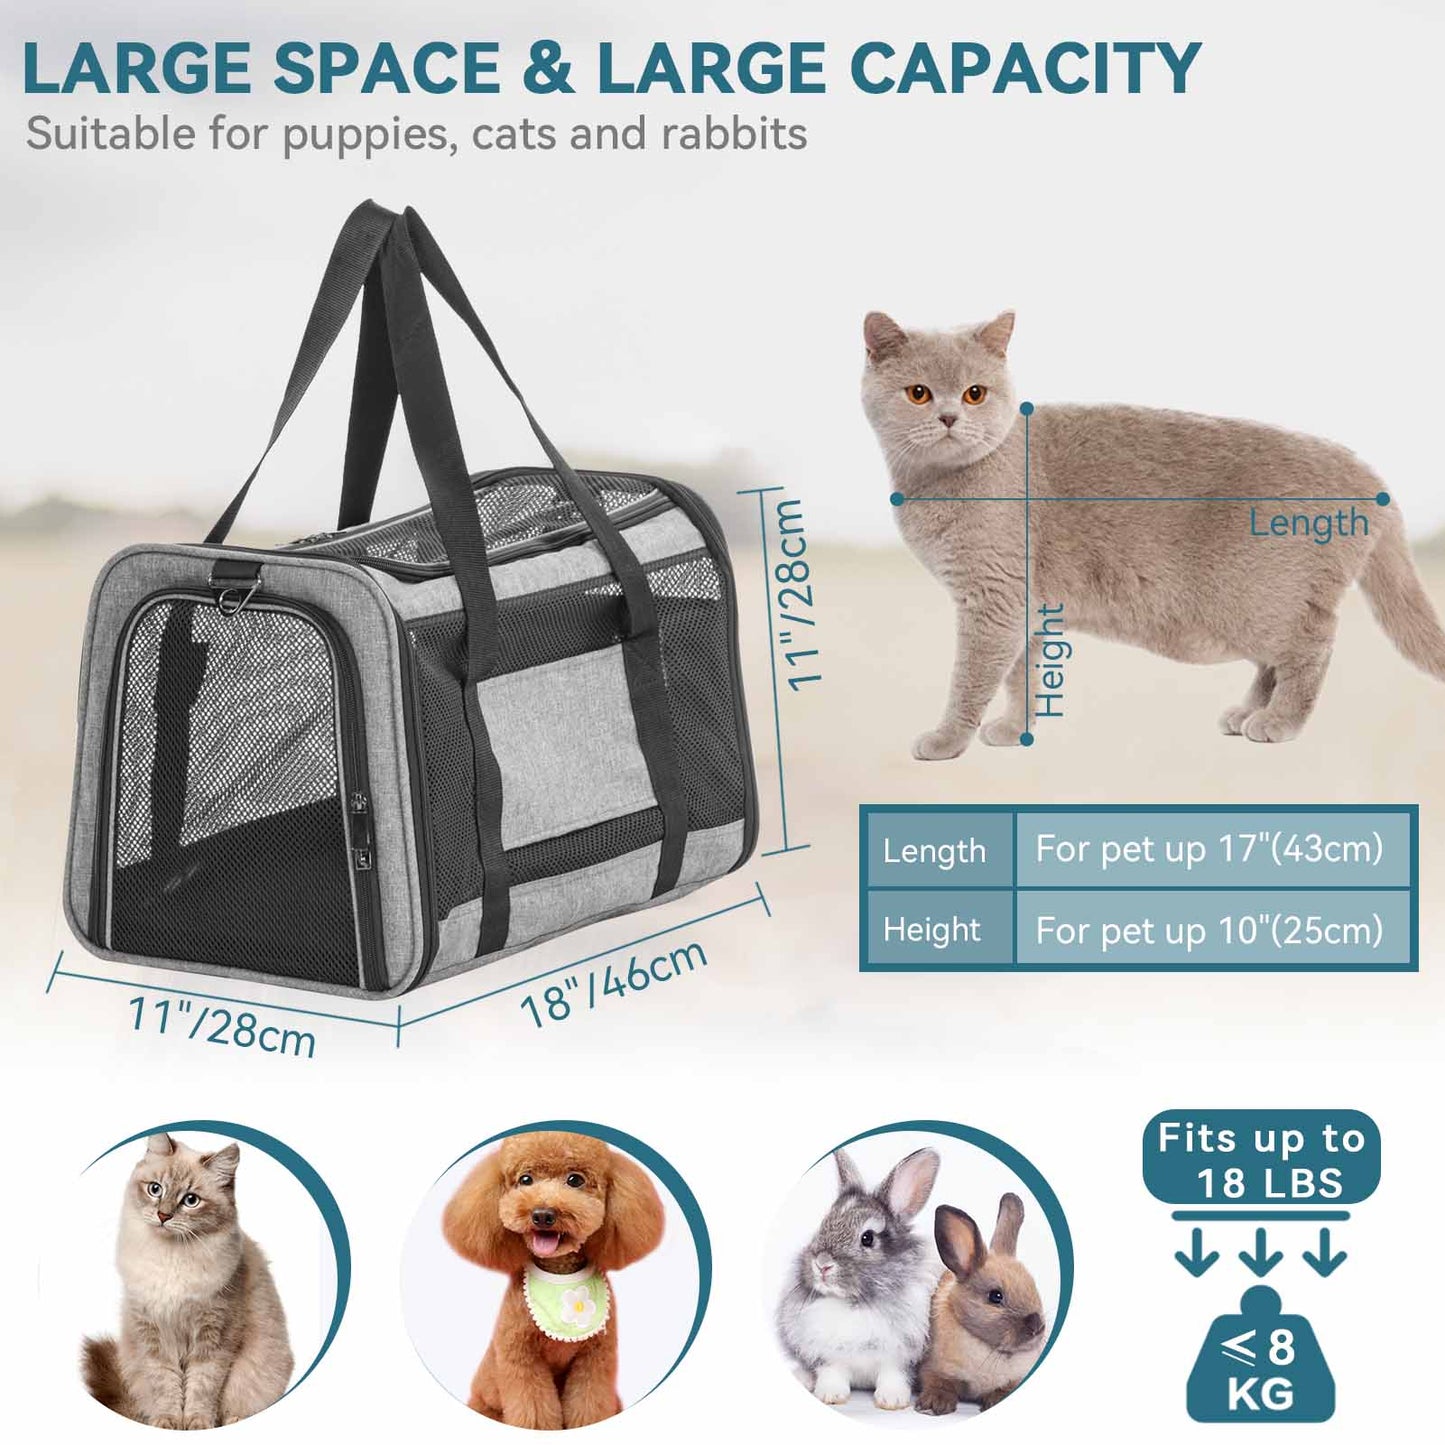 Petsfit-Large-Capacity-Lightweight-Washable-Soft-Sided-Pet-Travel-Carrier-03